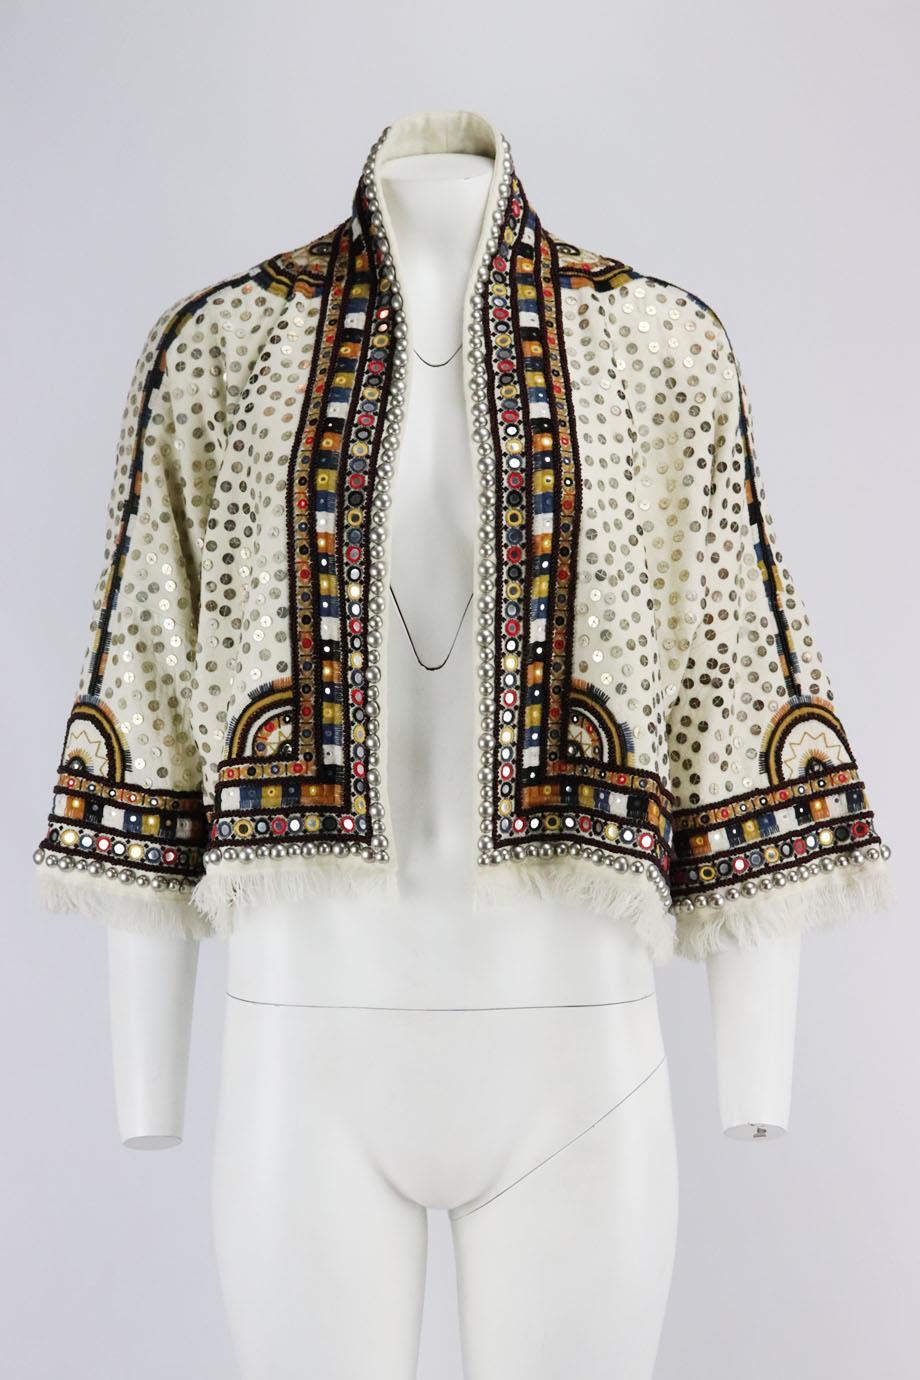 Isabel Marant embellished canvas jacket. Cream. Long sleeve, v-neck. Slips on. 100% Wool; lining: 100% silk; lining2: 100% cotton; embroidery: 100% cotton. Size: FR 40 (UK 12, US 8, IT 44). Shoulder to shoulder: 18 in. Bust: 52 in. Waist: 47 in.